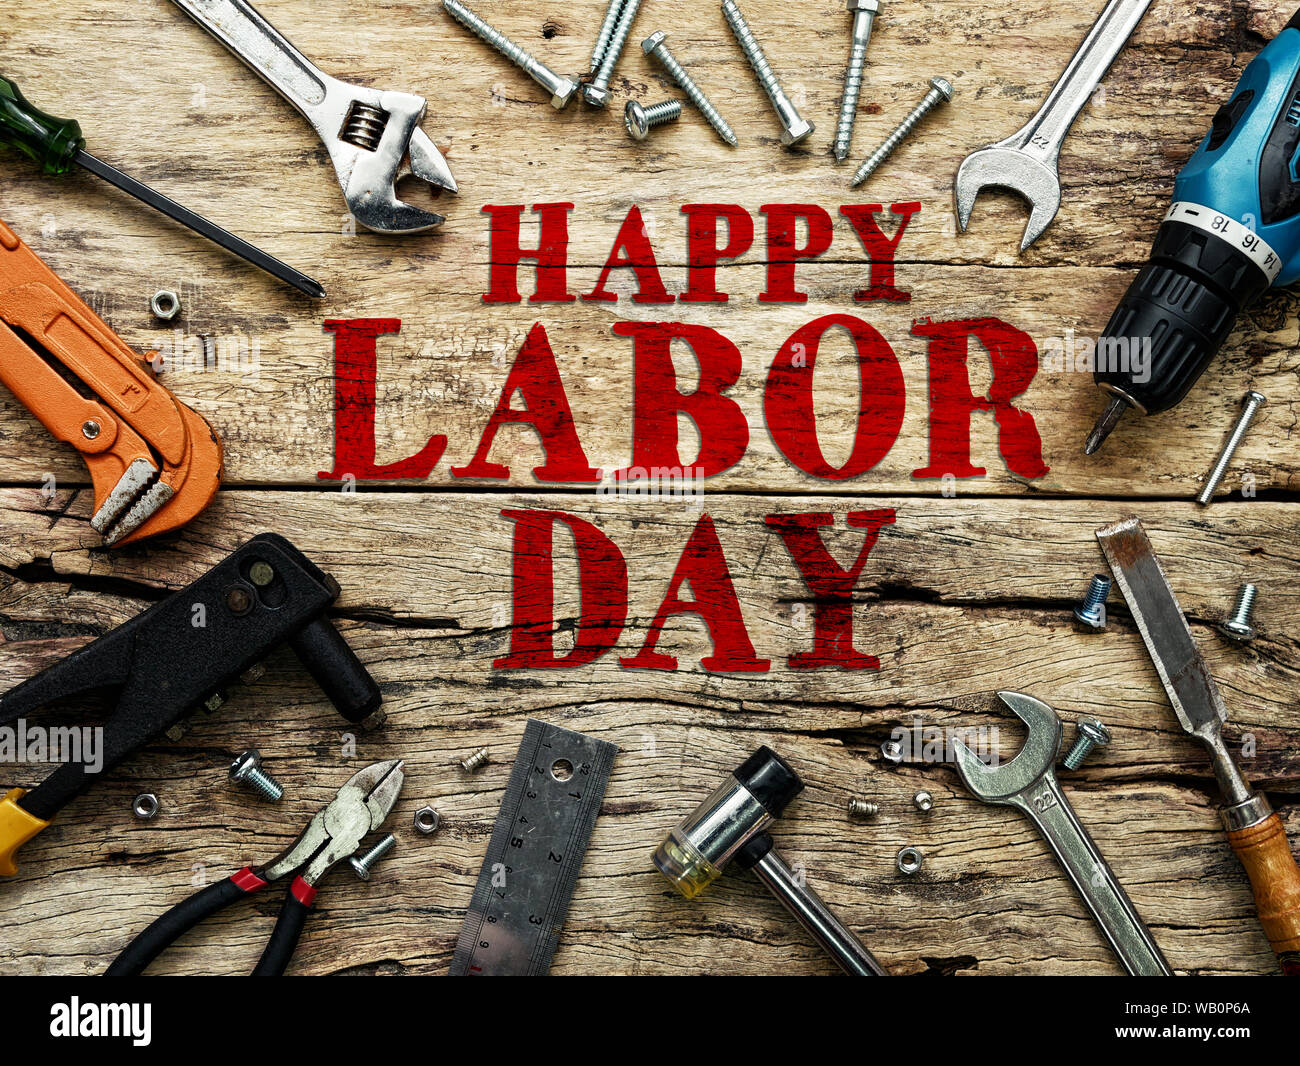 Happy Labor day text in red color on wooden background with construction repair tools. Stock Photo